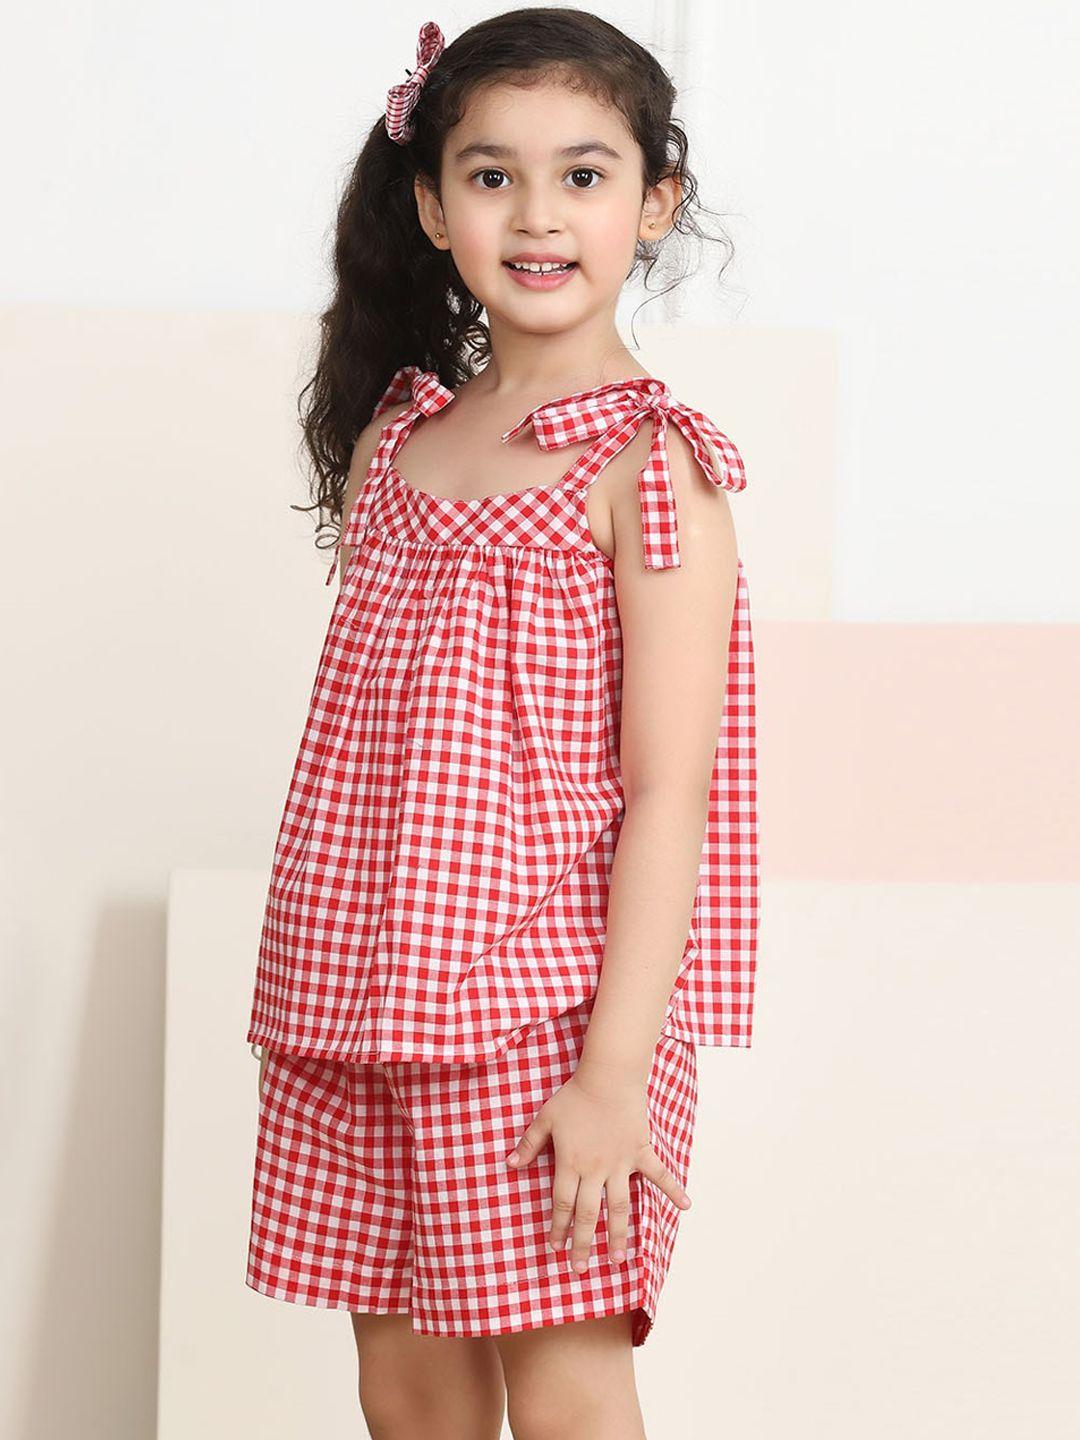 biglilpeople unisex kids red & white checked pure cotton top with shorts